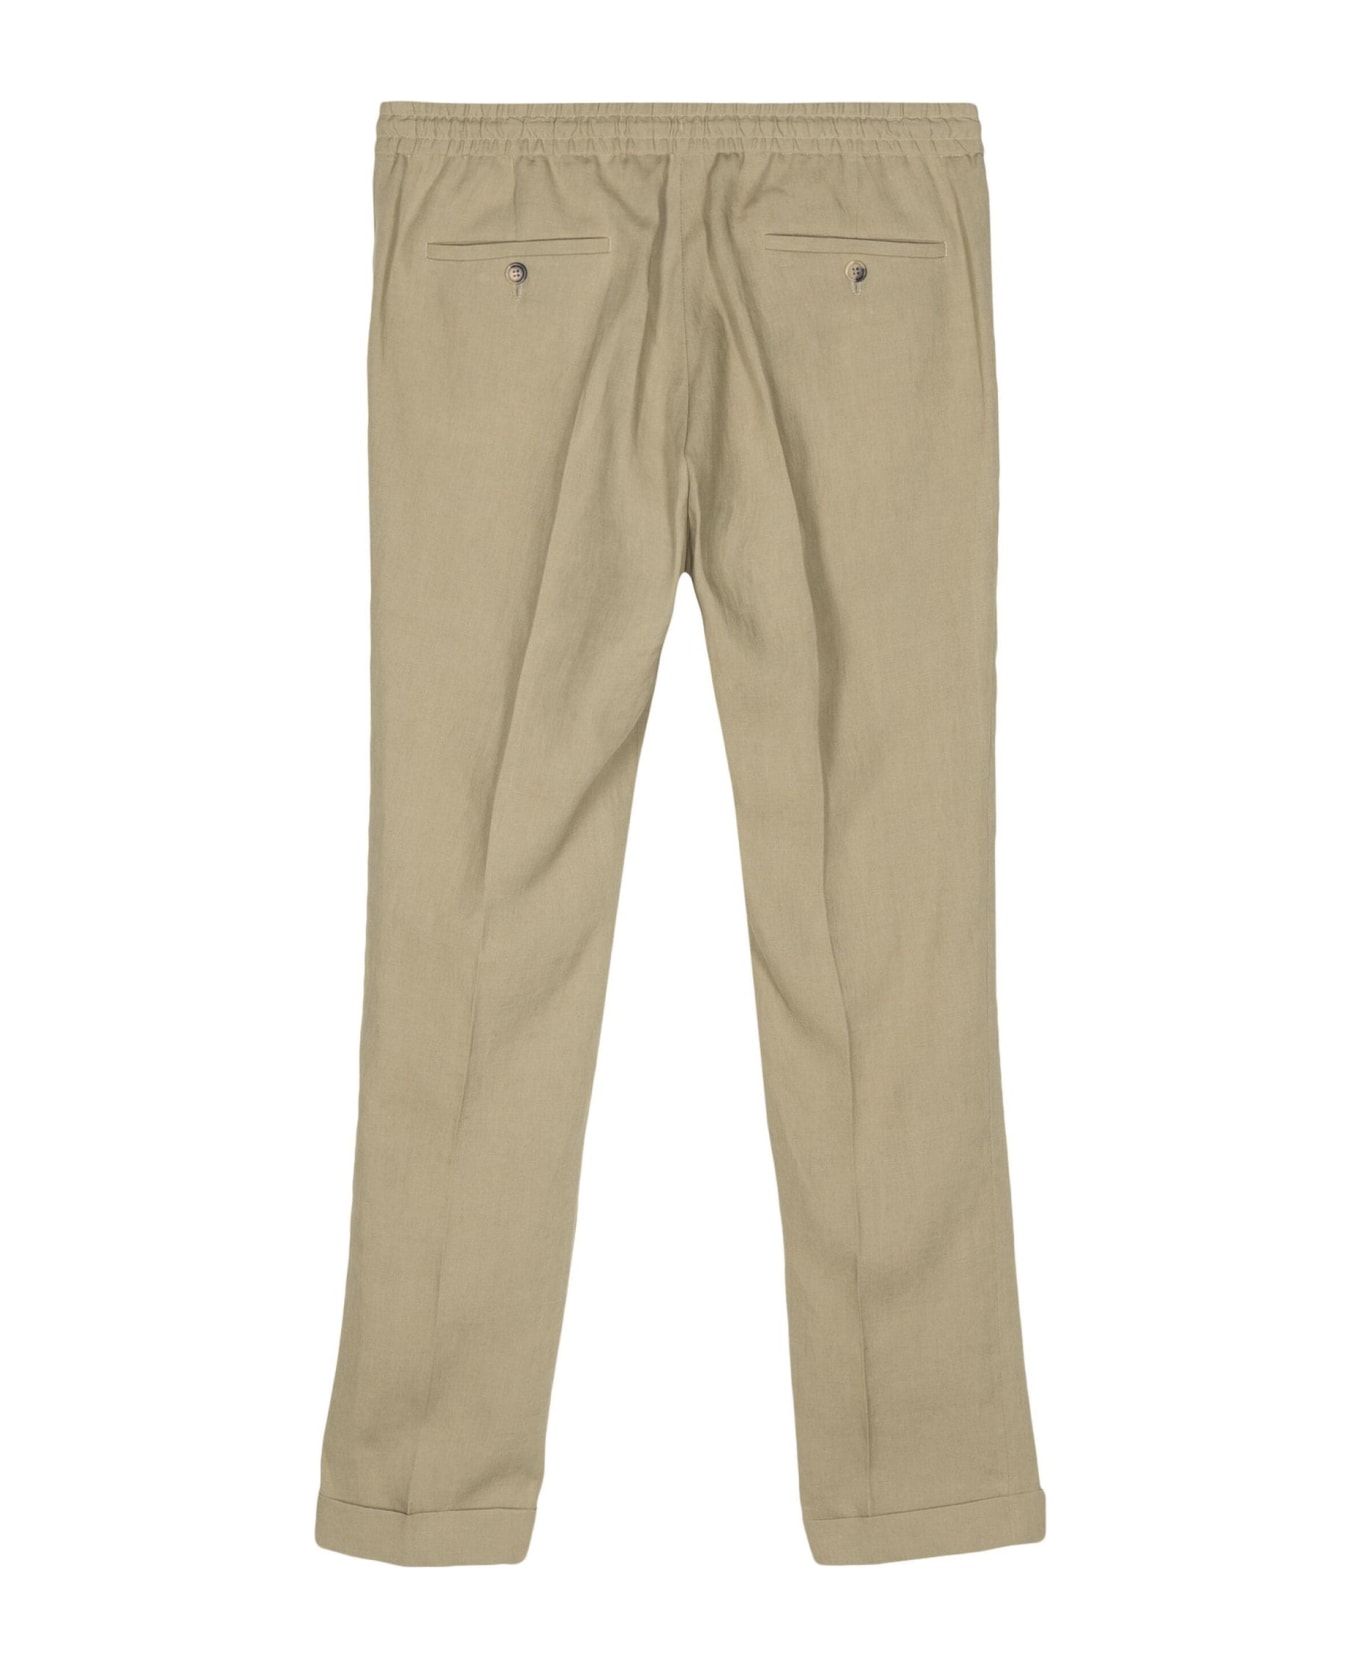 Paul Smith Trousers Green - Green